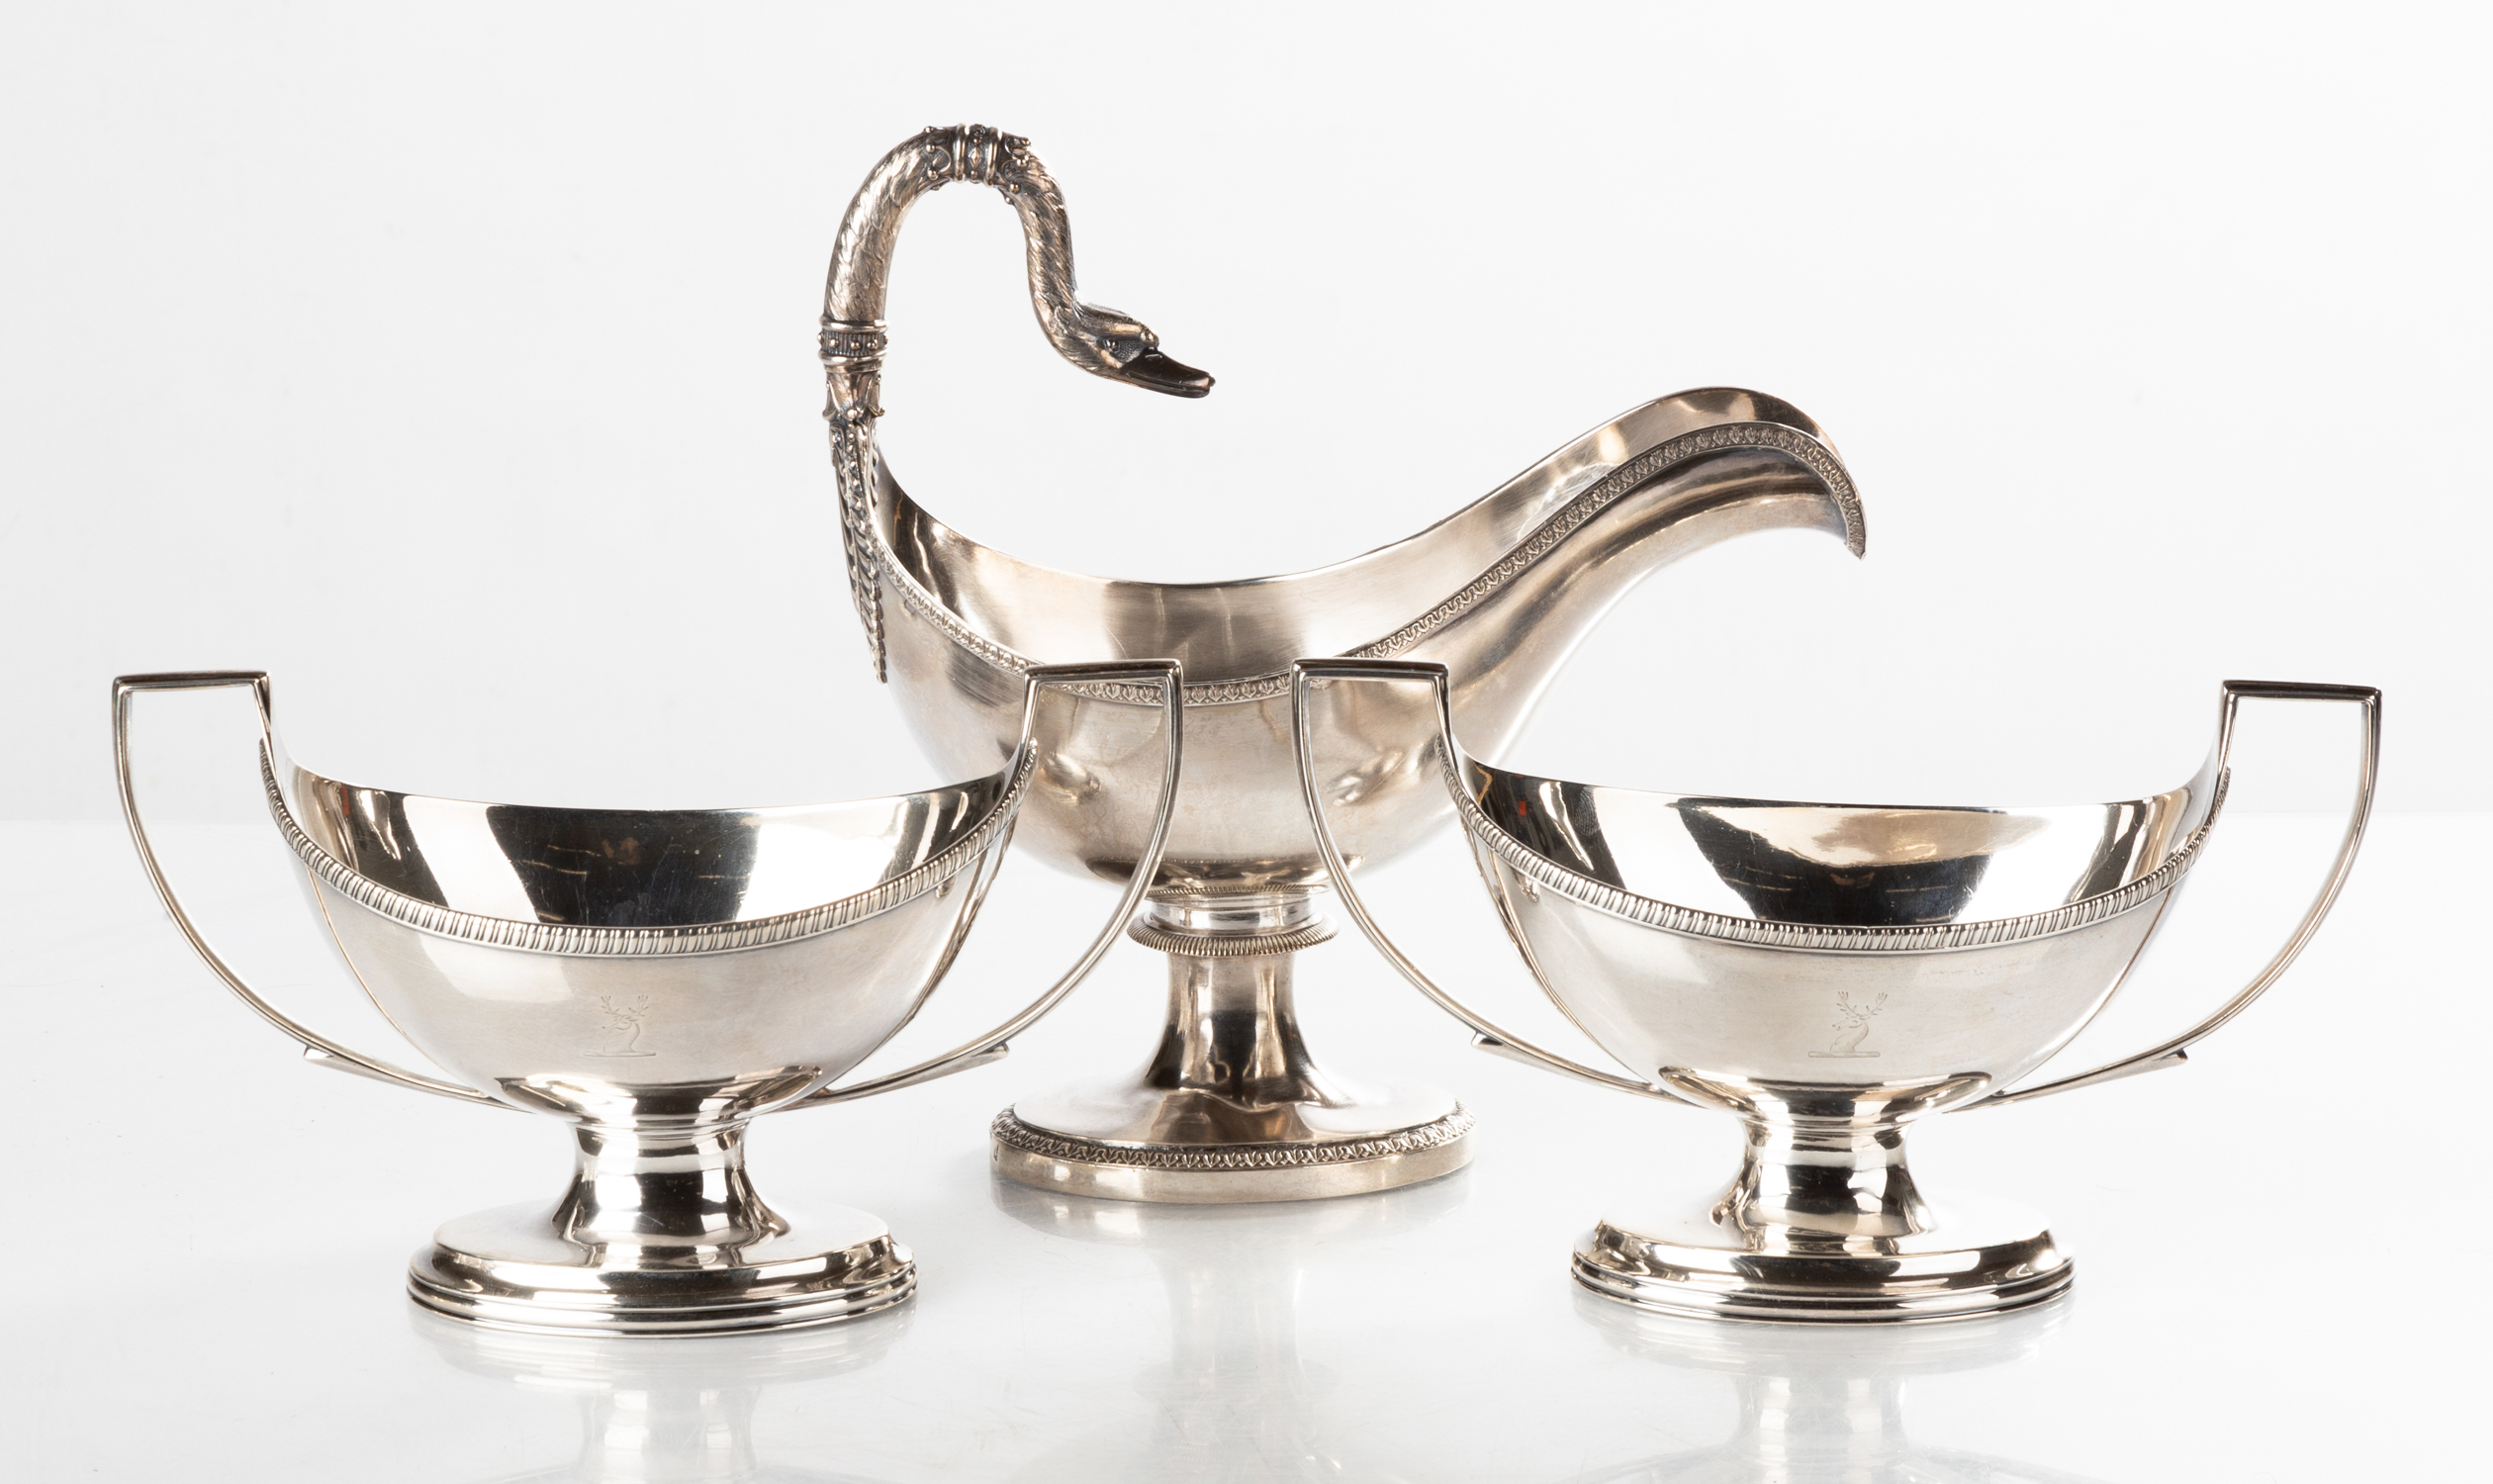 THREE STERLING SILVER SAUCE BOATS 2faf77b